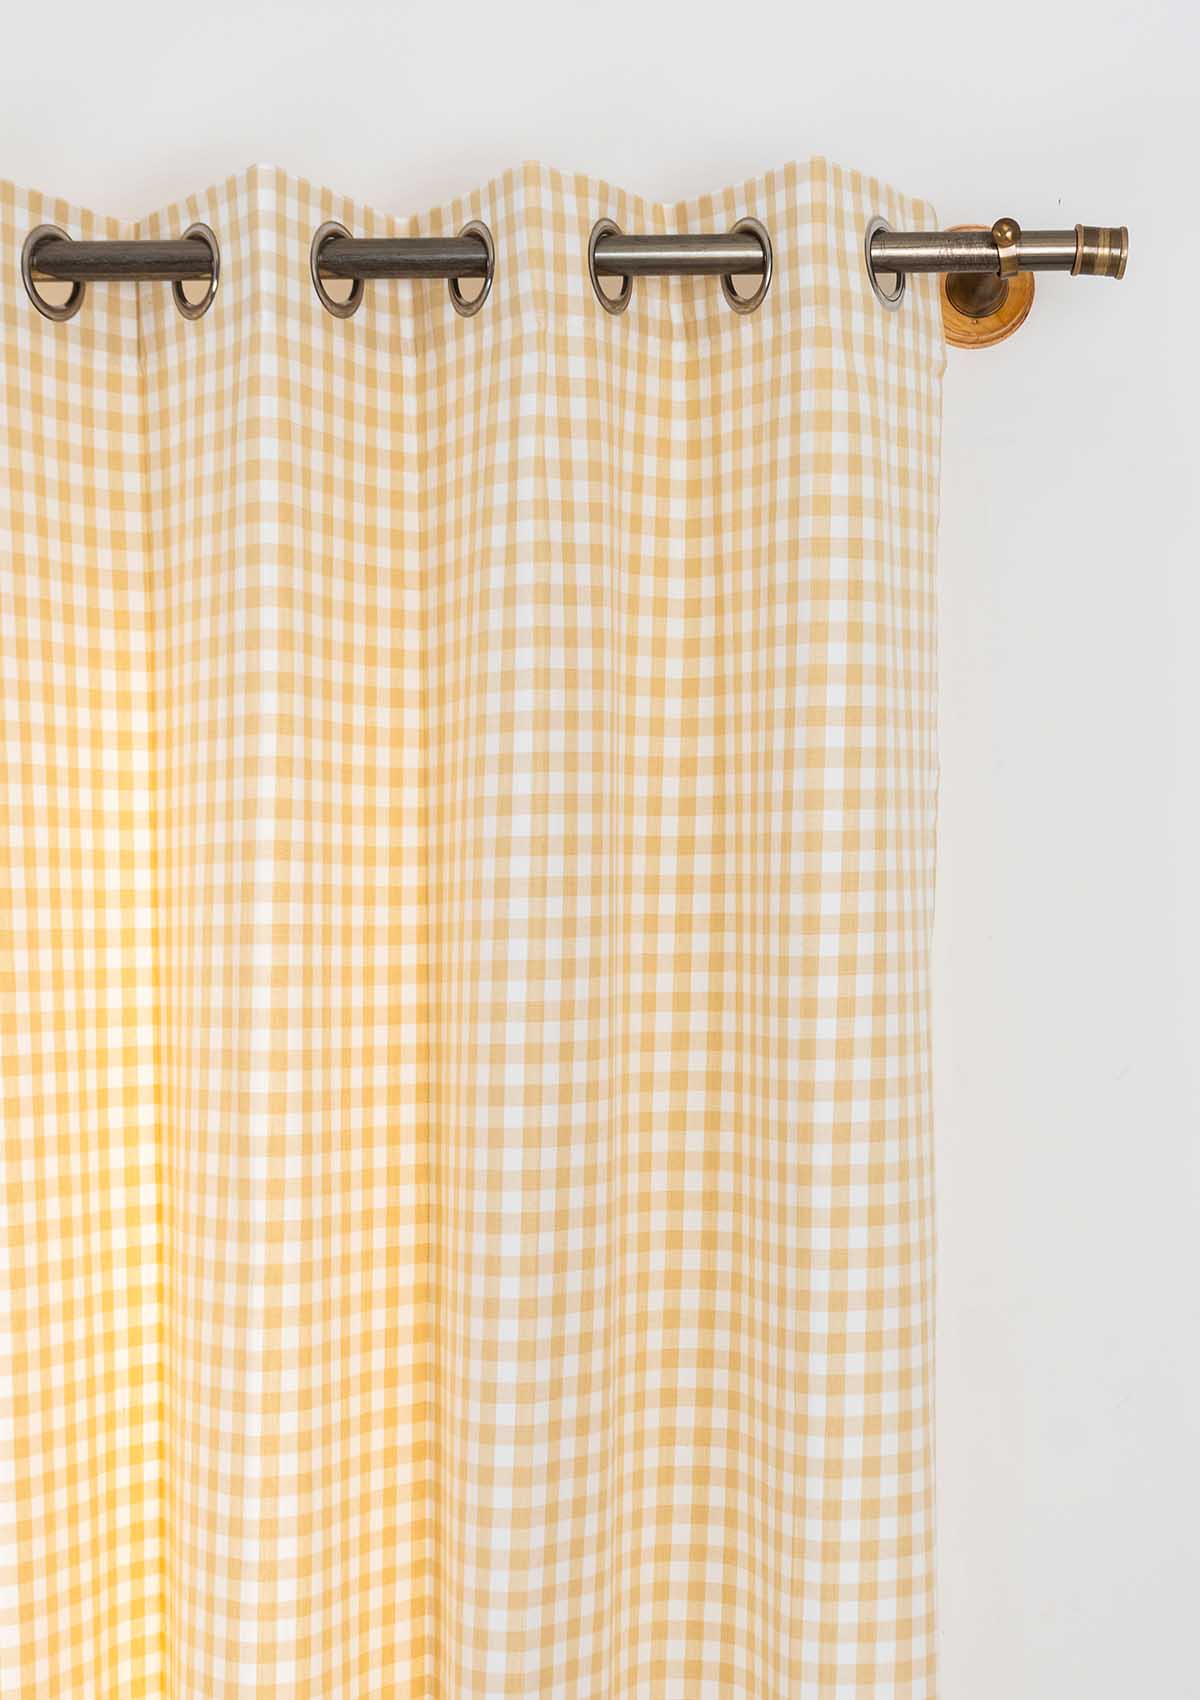 Gingham Woven 100% Customizable Cotton geometric curtain for living room - Room darkening - Ivory